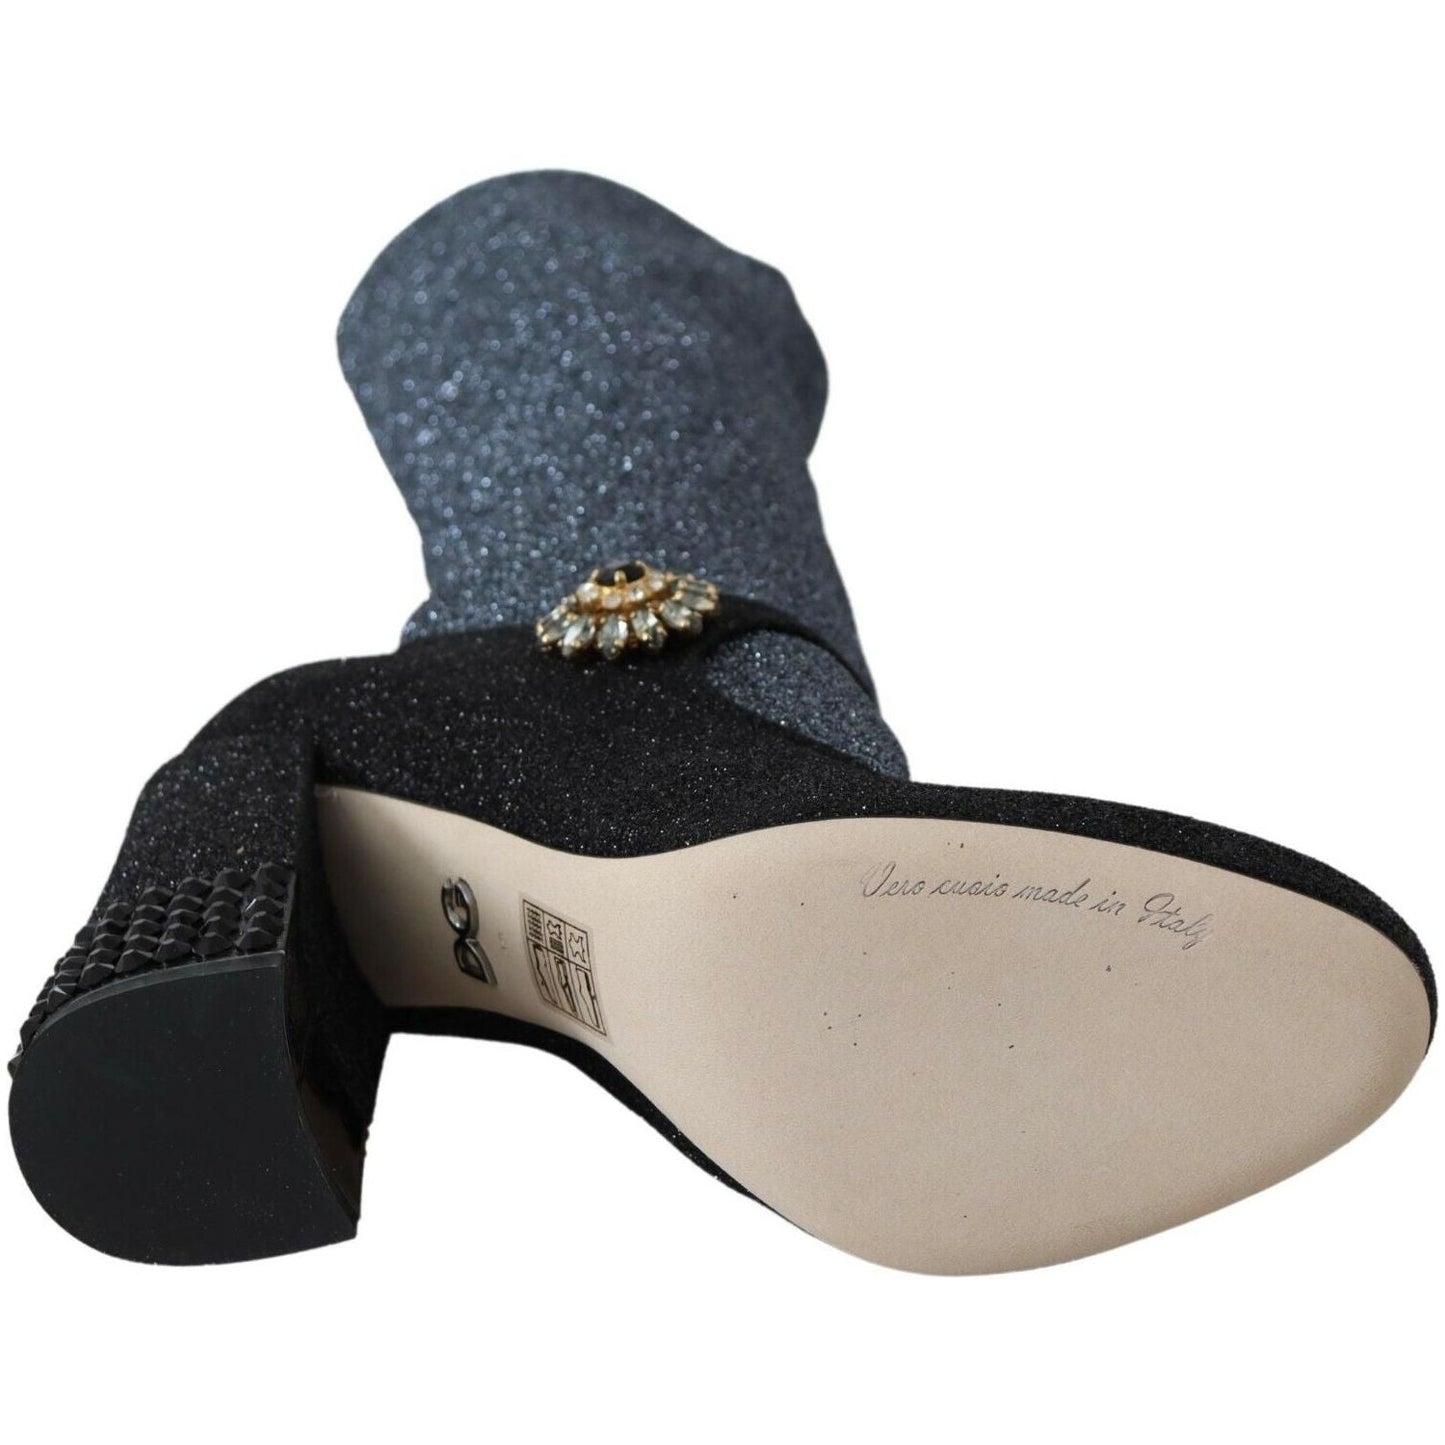 Dolce & Gabbana Glamorous Crystal-Embellished Booties black-crystal-mary-janes-booties-shoes